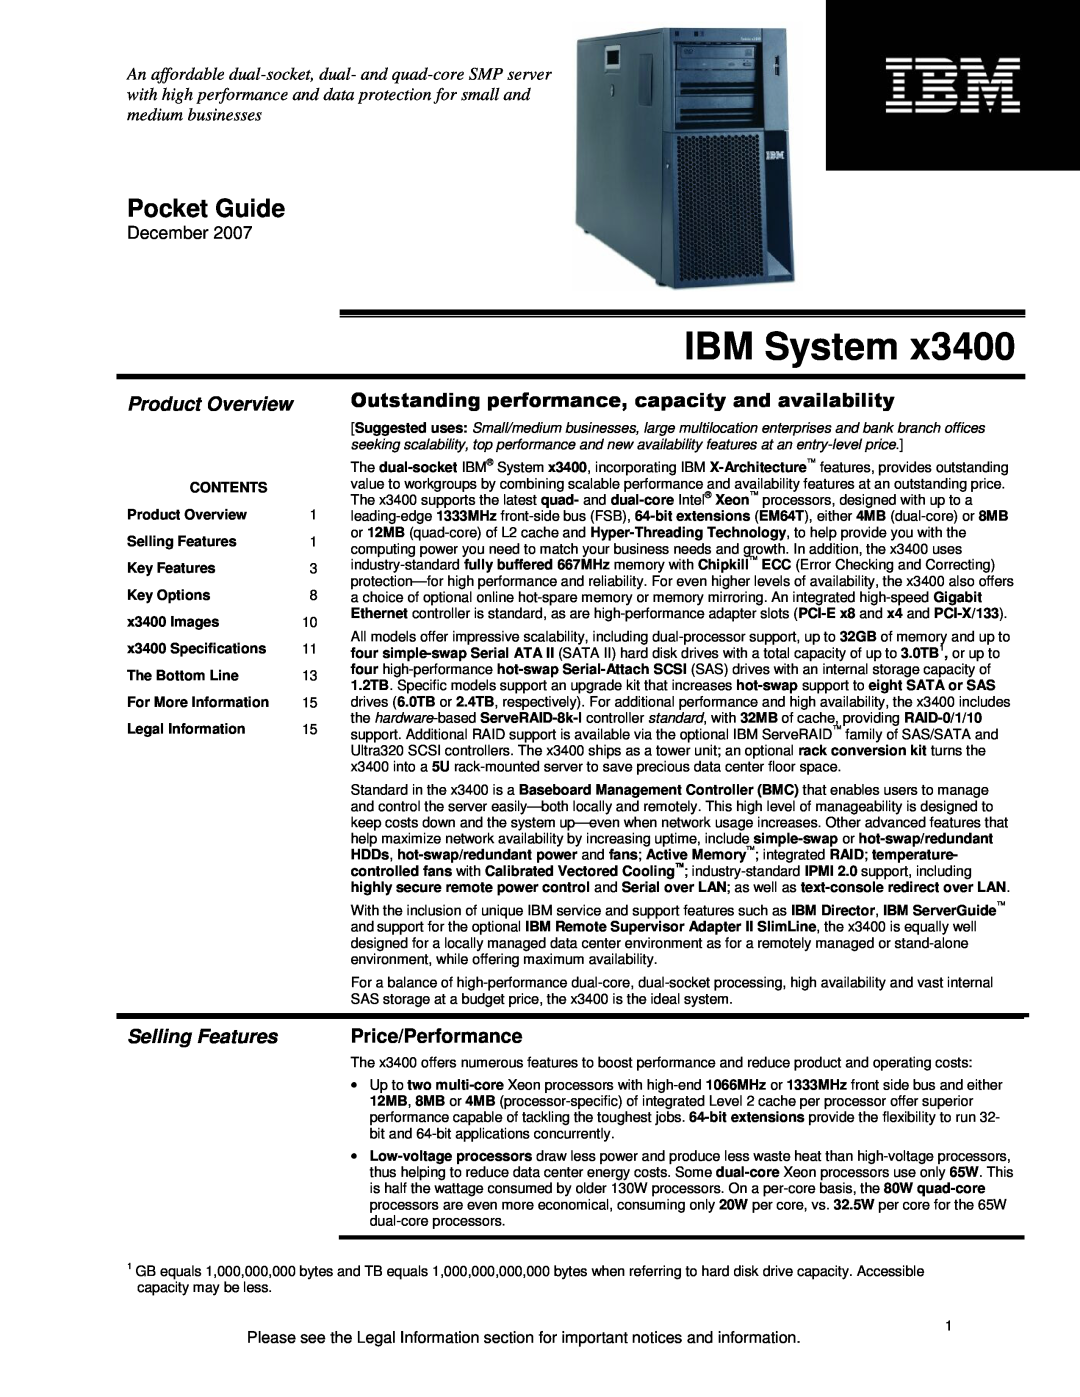 IBM x3400 specifications Product Overview, Selling Features, Price/Performance, December, IBM System, Pocket Guide 